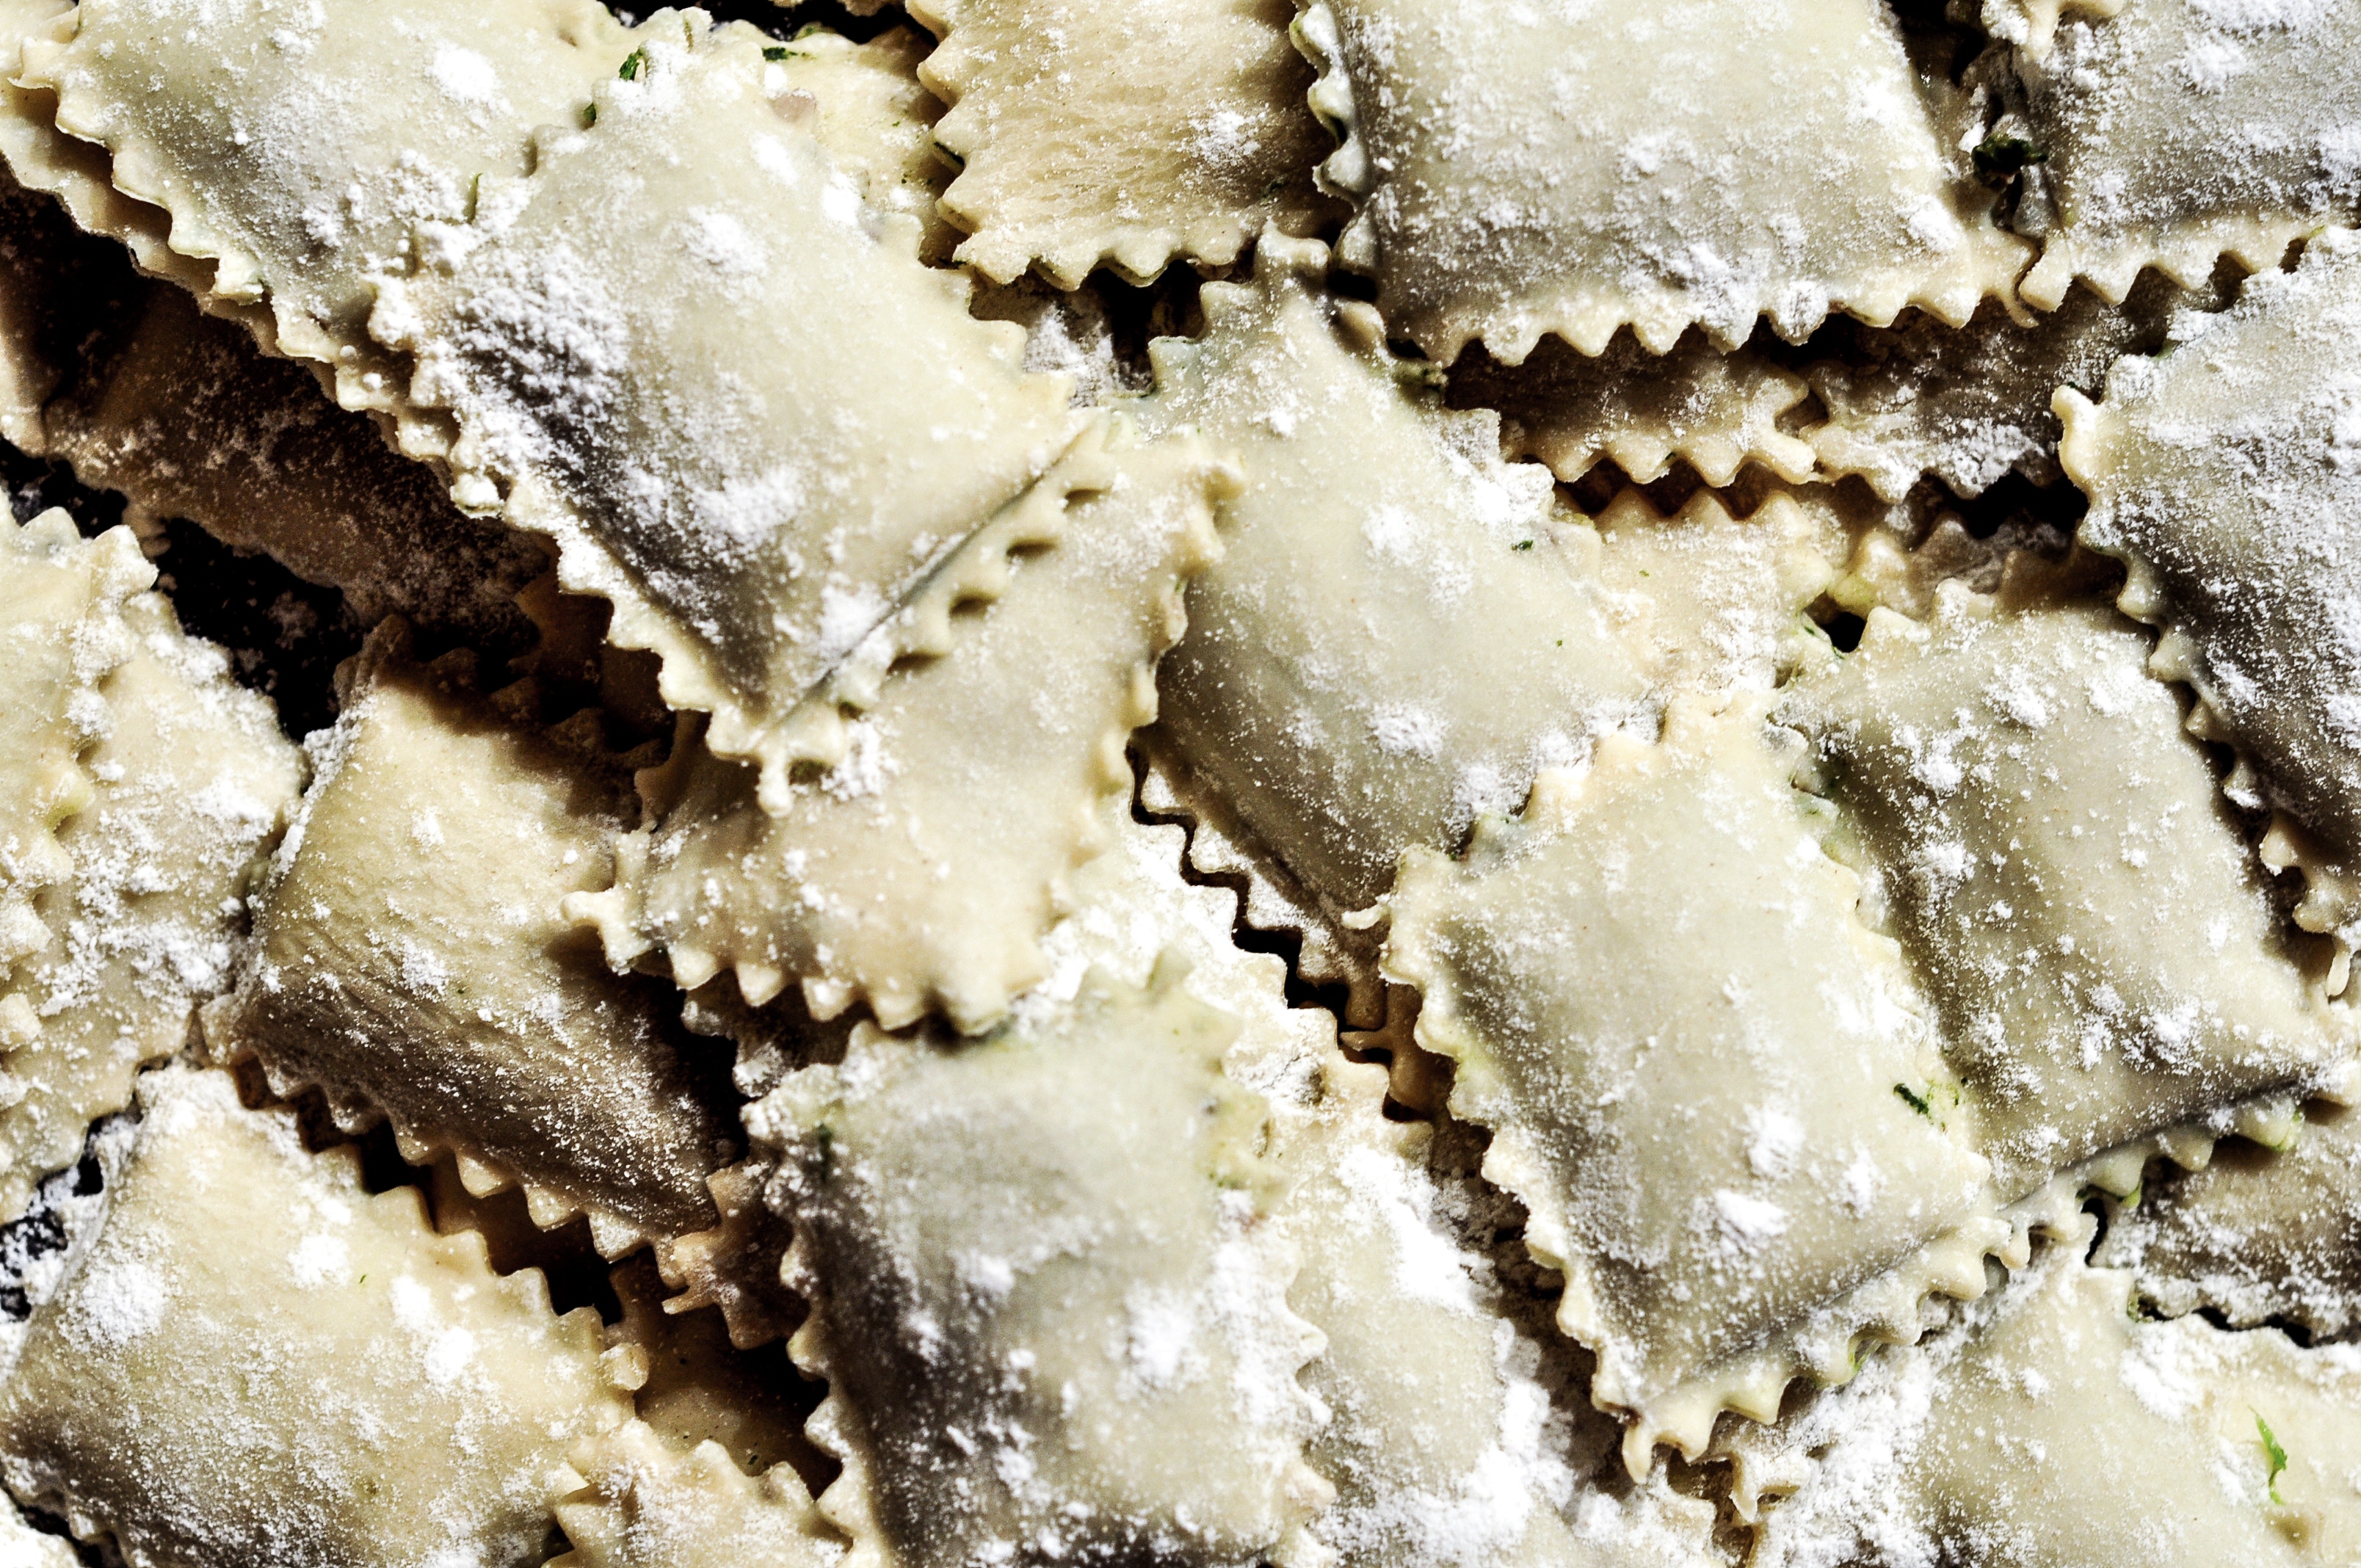 Uncooked ravioli dusted with flour.